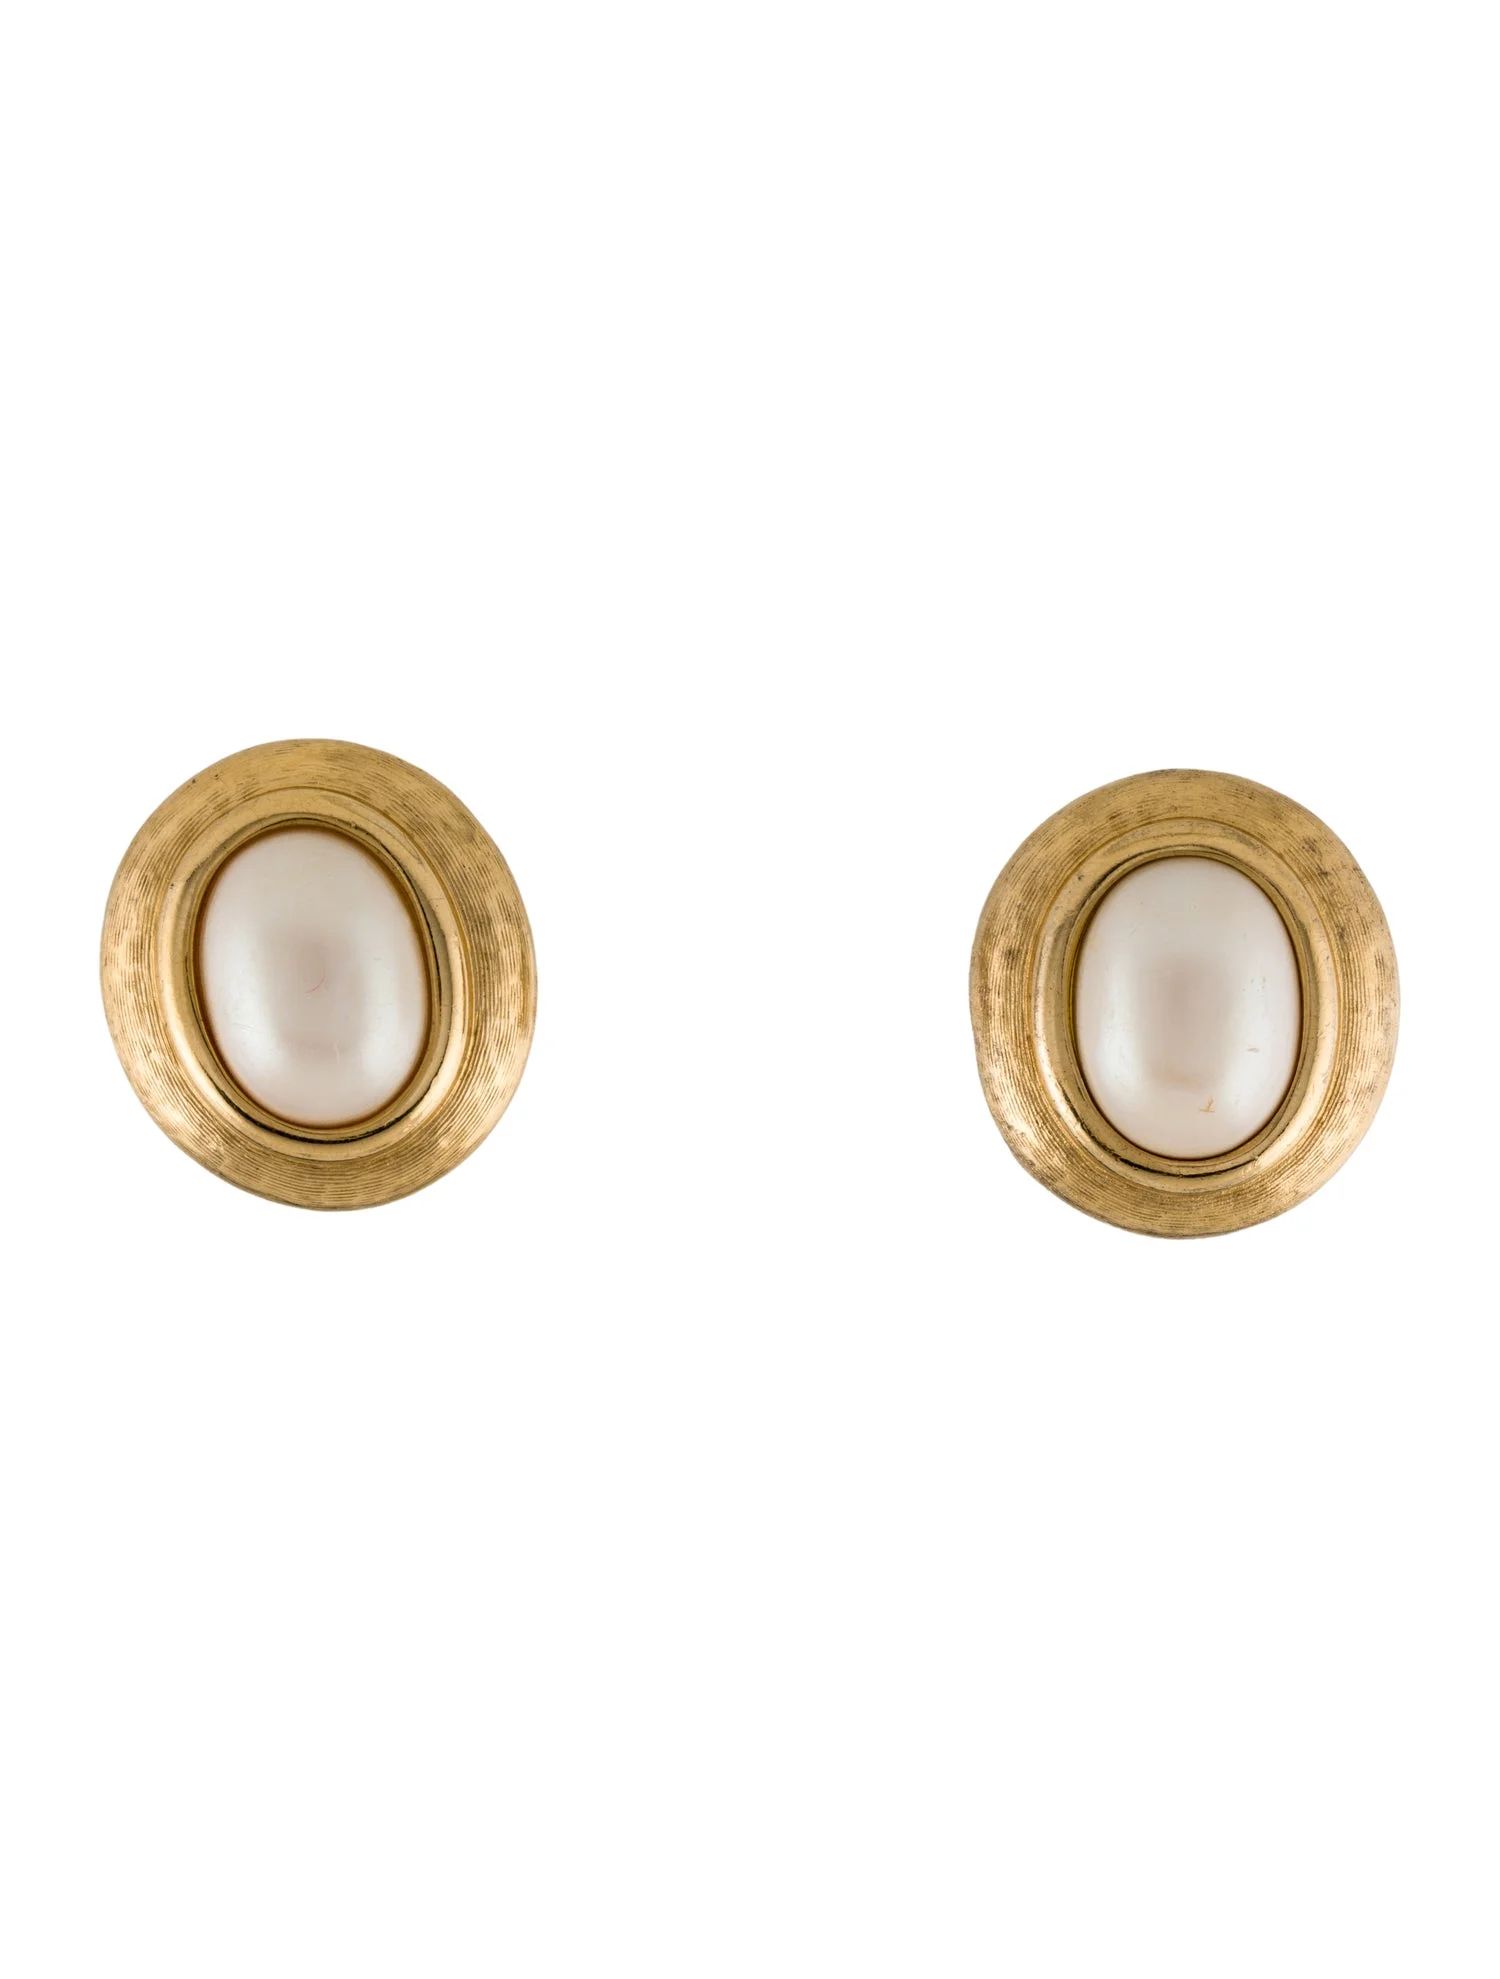 Vintage Faux Pearl Oval Clip On Earrings | The RealReal